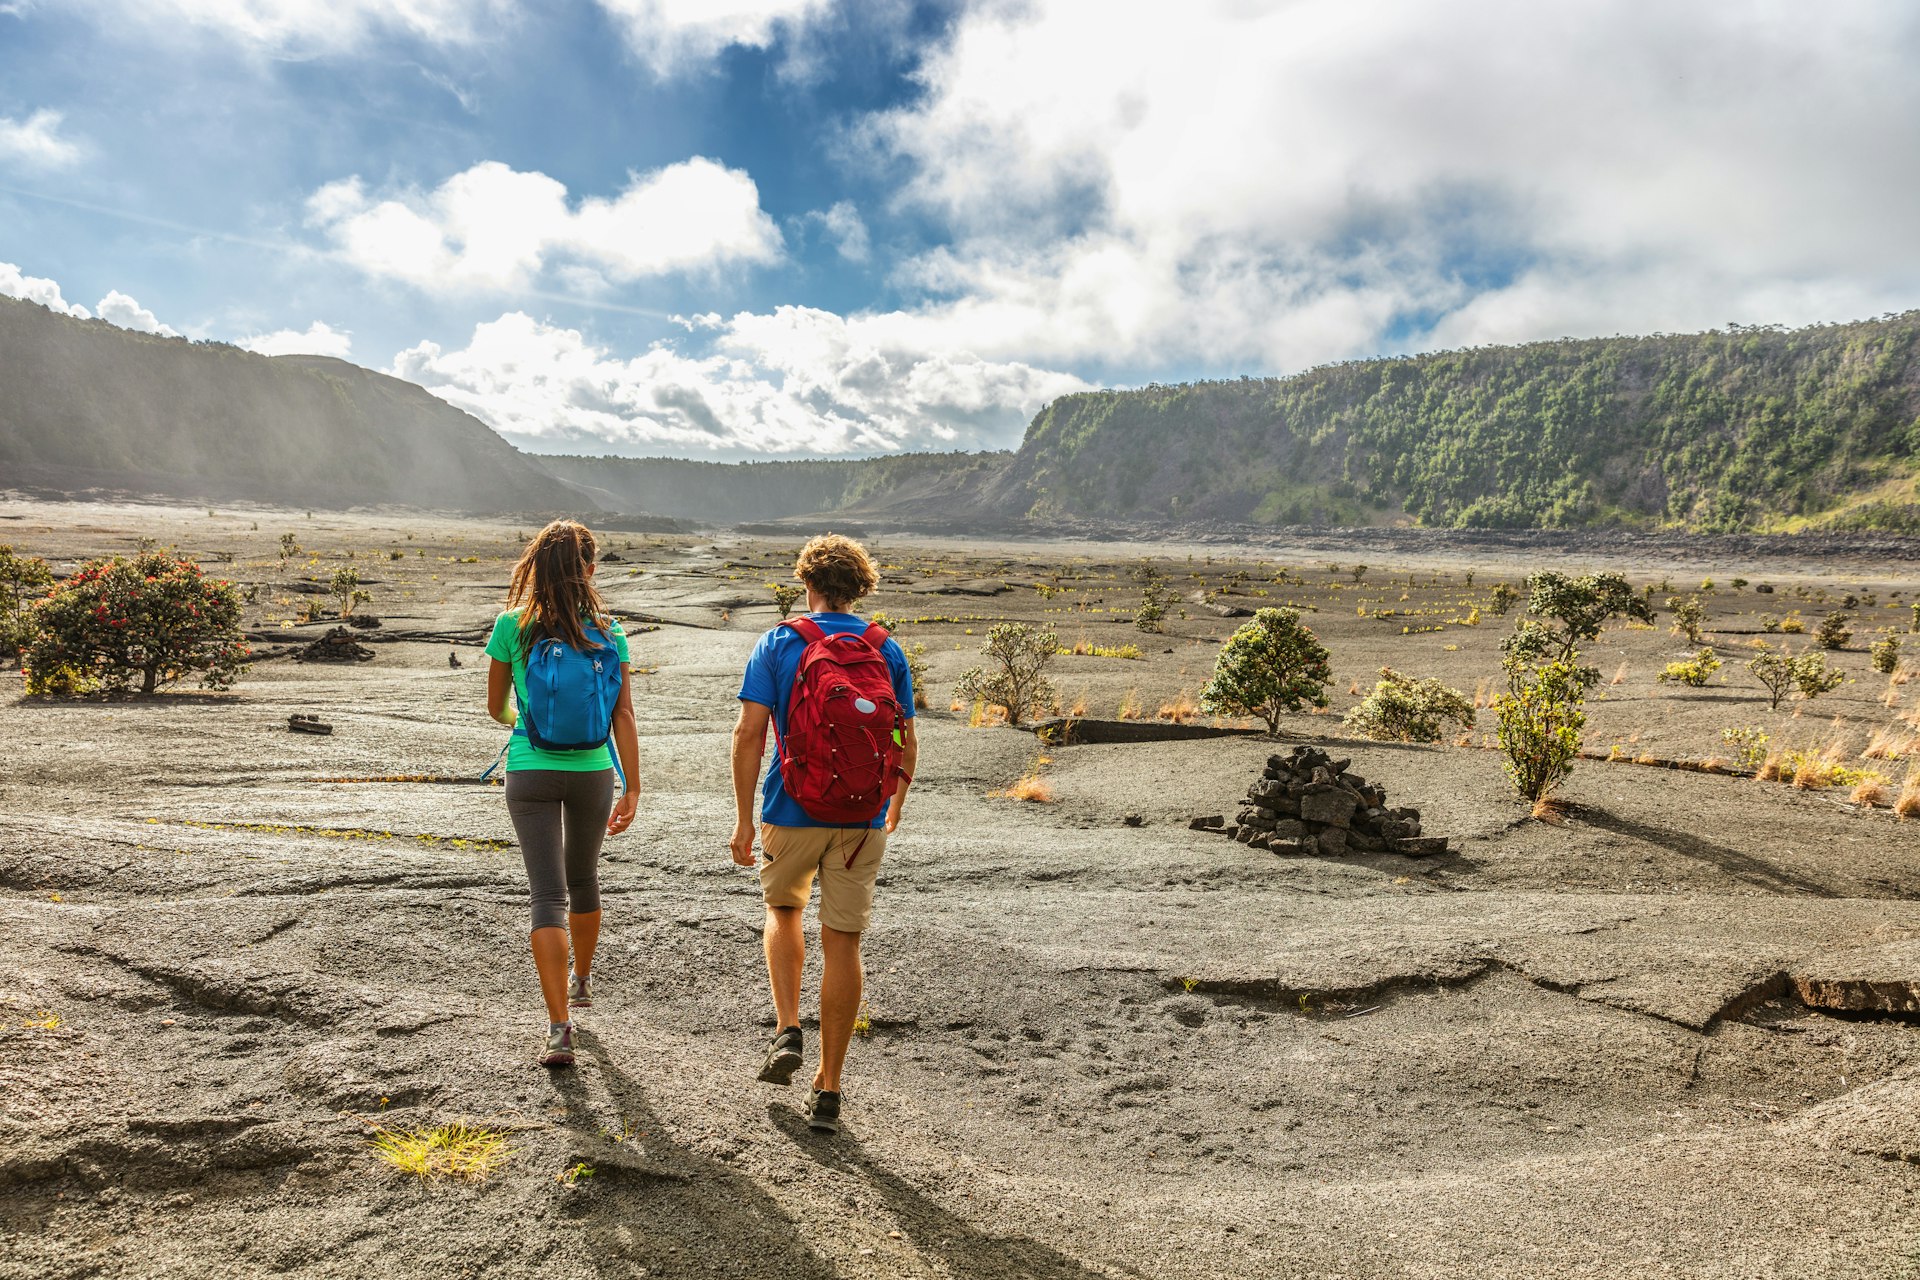 Two hikers walk away from the camera on a hiking trail across a crater, a large dusty expanse 